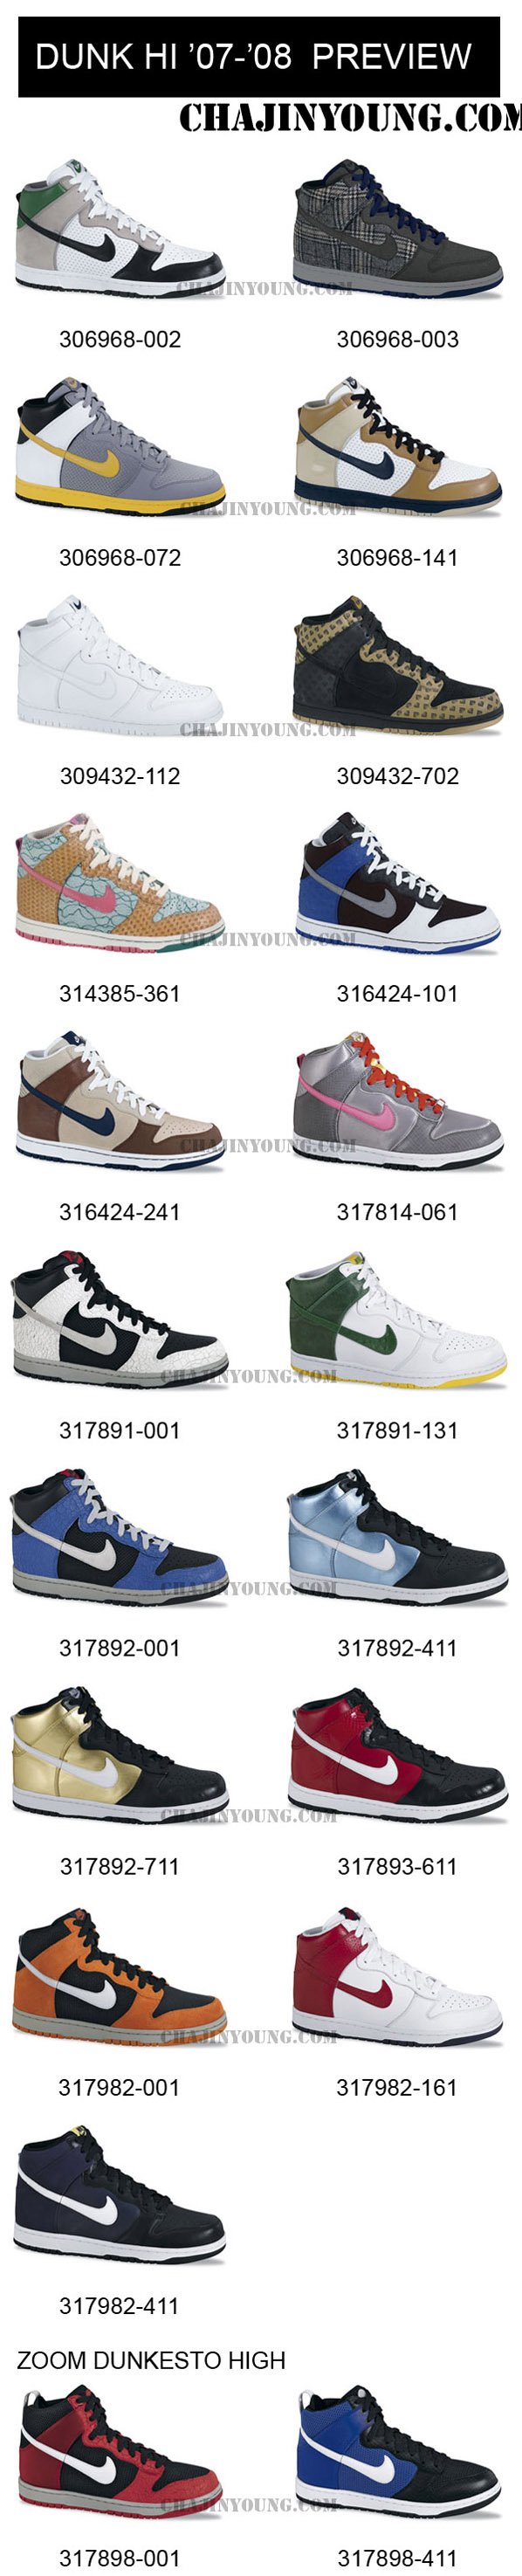 nike dunks 2007 limited edition